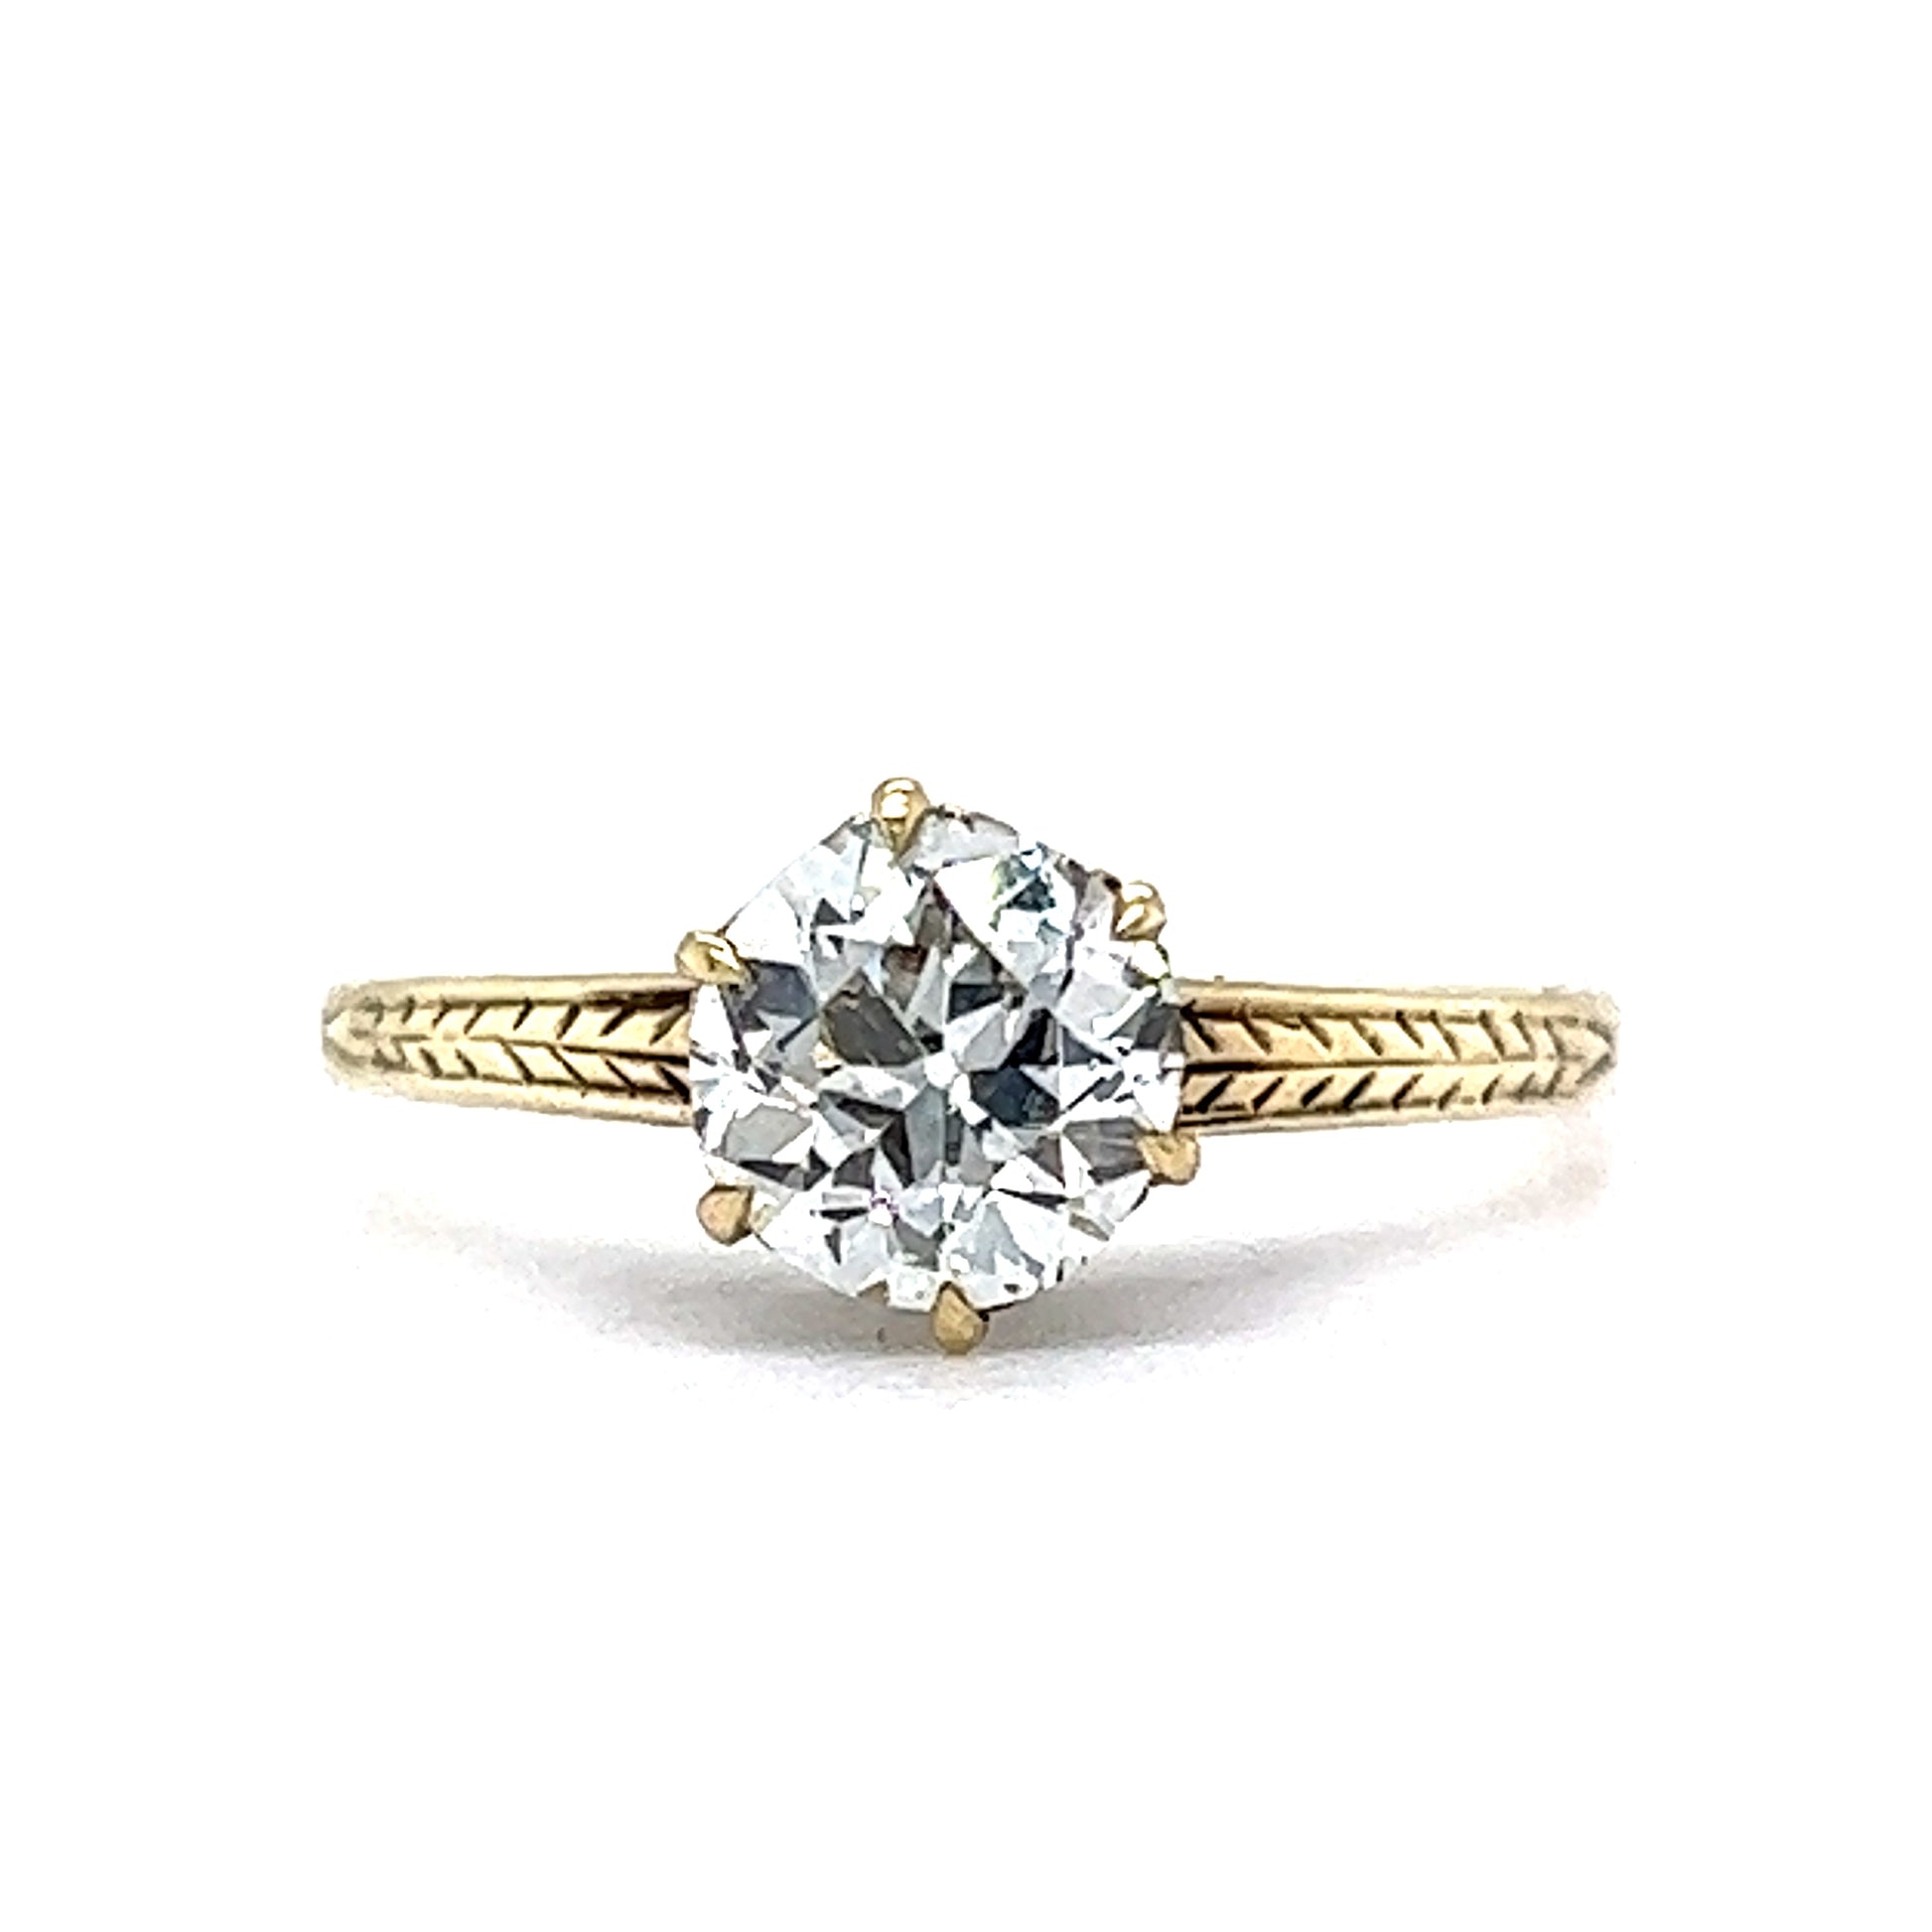 1.02 Victorian Diamond Engagement Ring in 14k Yellow GoldComposition: 14 Karat Yellow GoldRing Size: 6.5Total Diamond Weight: 1.02 ctTotal Gram Weight: 1.9 gInscription: 14K